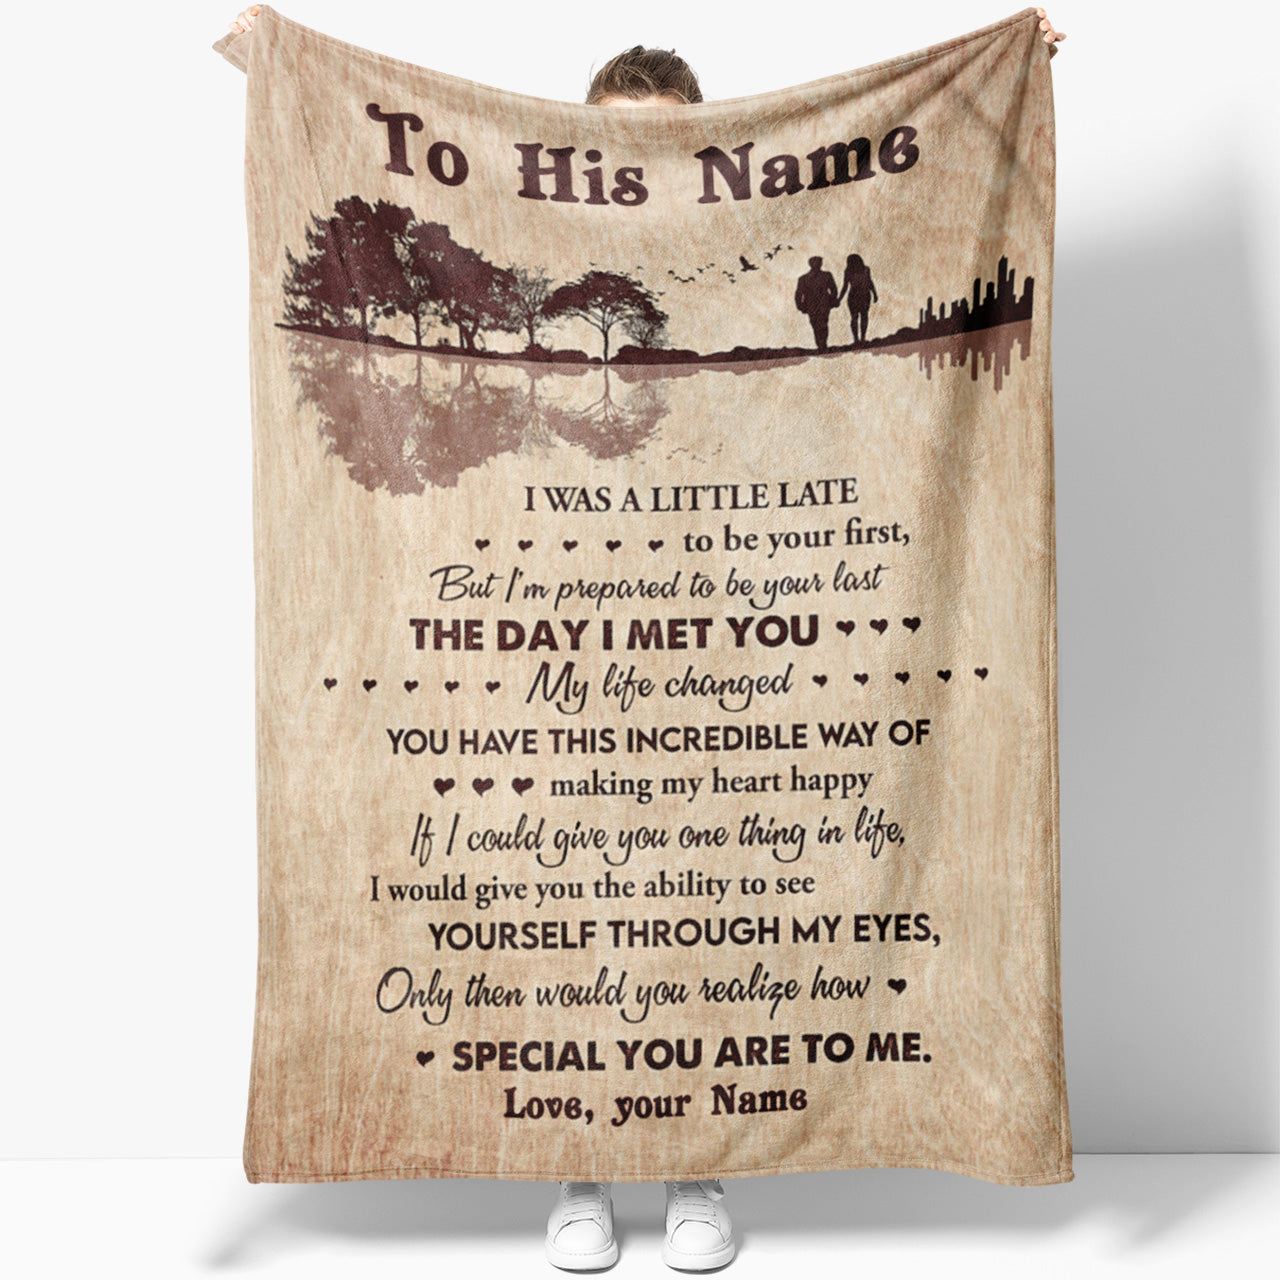 Blanket Gift For Him, Anniversary Gift For Husband, You Are Special to Me